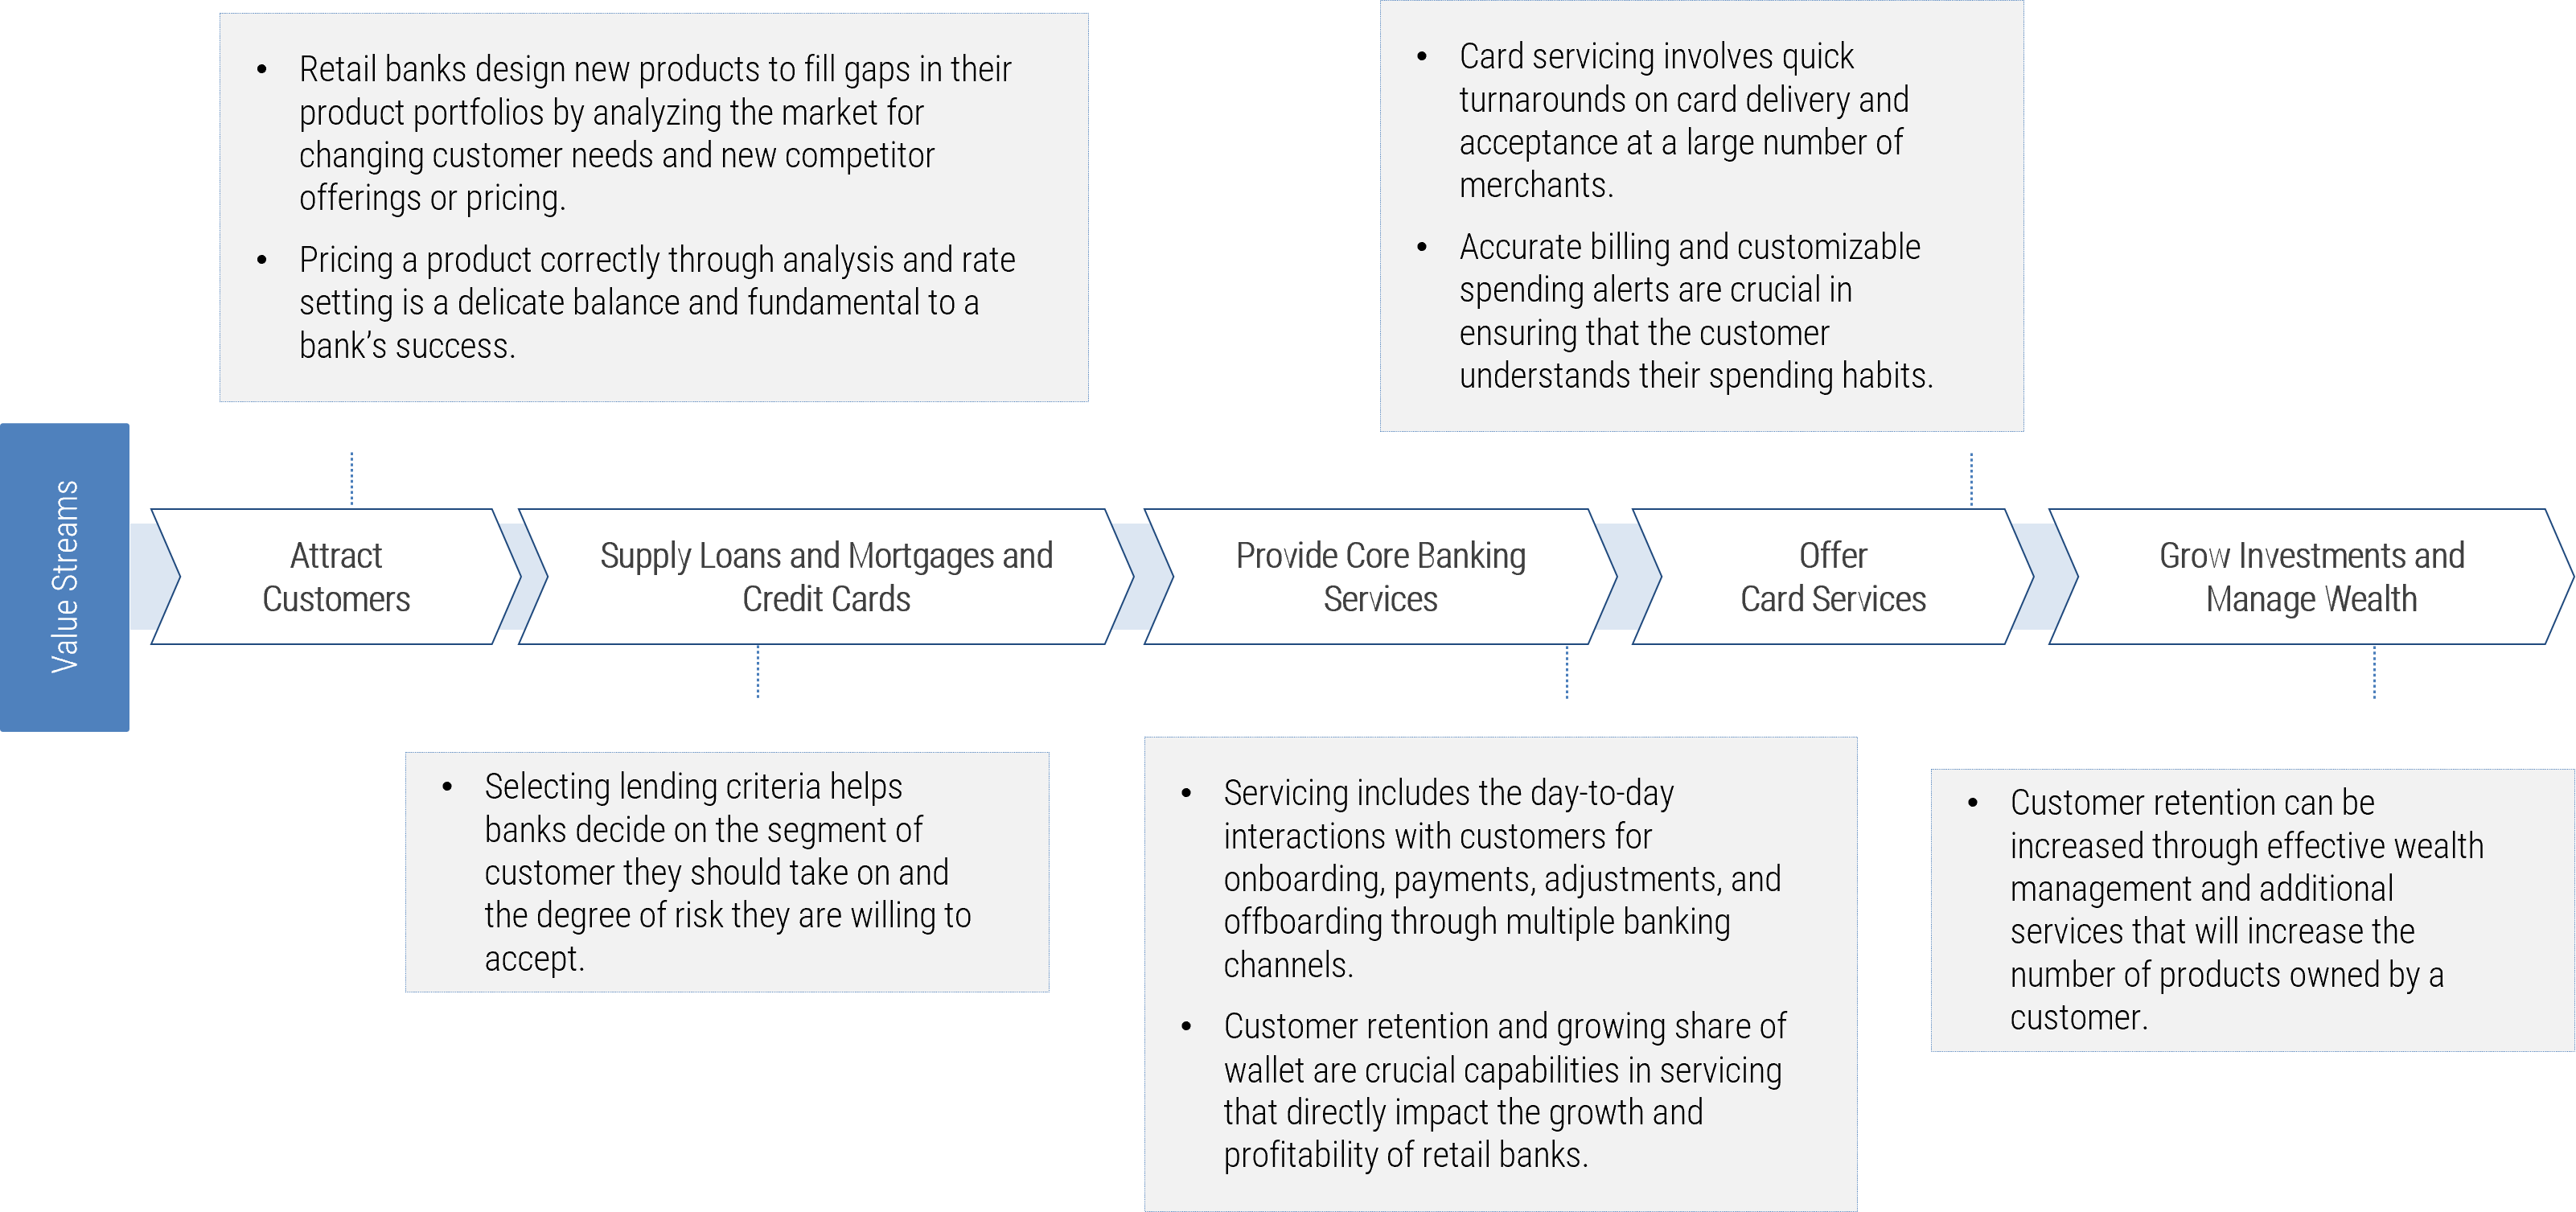 Example Value Stream for Retail Banking with five value chains. 'Attract Customers: Retail banks design new products to fill gaps in their product portfolios by analyzing the market for changing customer needs and new competitor offerings or pricing; Pricing a product correctly through analysis and rate setting is a delicate balance and fundamental to a bank’s success.' 'Supply Loans and Mortgages and Credit Cards: Selecting lending criteria helps banks decide on the segment of customer they should take on and the degree of risk they are willing to accept.' 'Provide Core Banking Services: Servicing includes the day-to-day interactions with customers for onboarding, payments, adjustments, and offboarding through multiple banking channels; Customer retention and growing share of wallet are crucial capabilities in servicing that directly impact the growth and profitability of retail banks.' 'Offer Card Services: Card servicing involves quick turnarounds on card delivery and acceptance at a large number of merchants; Accurate billing and customizable spending alerts are crucial in ensuring that the customer understands their spending habits.' 'Grow Investments and Manage Wealth: Customer retention can be increased through effective wealth management and additional services that will increase the number of products owned by a customer.'